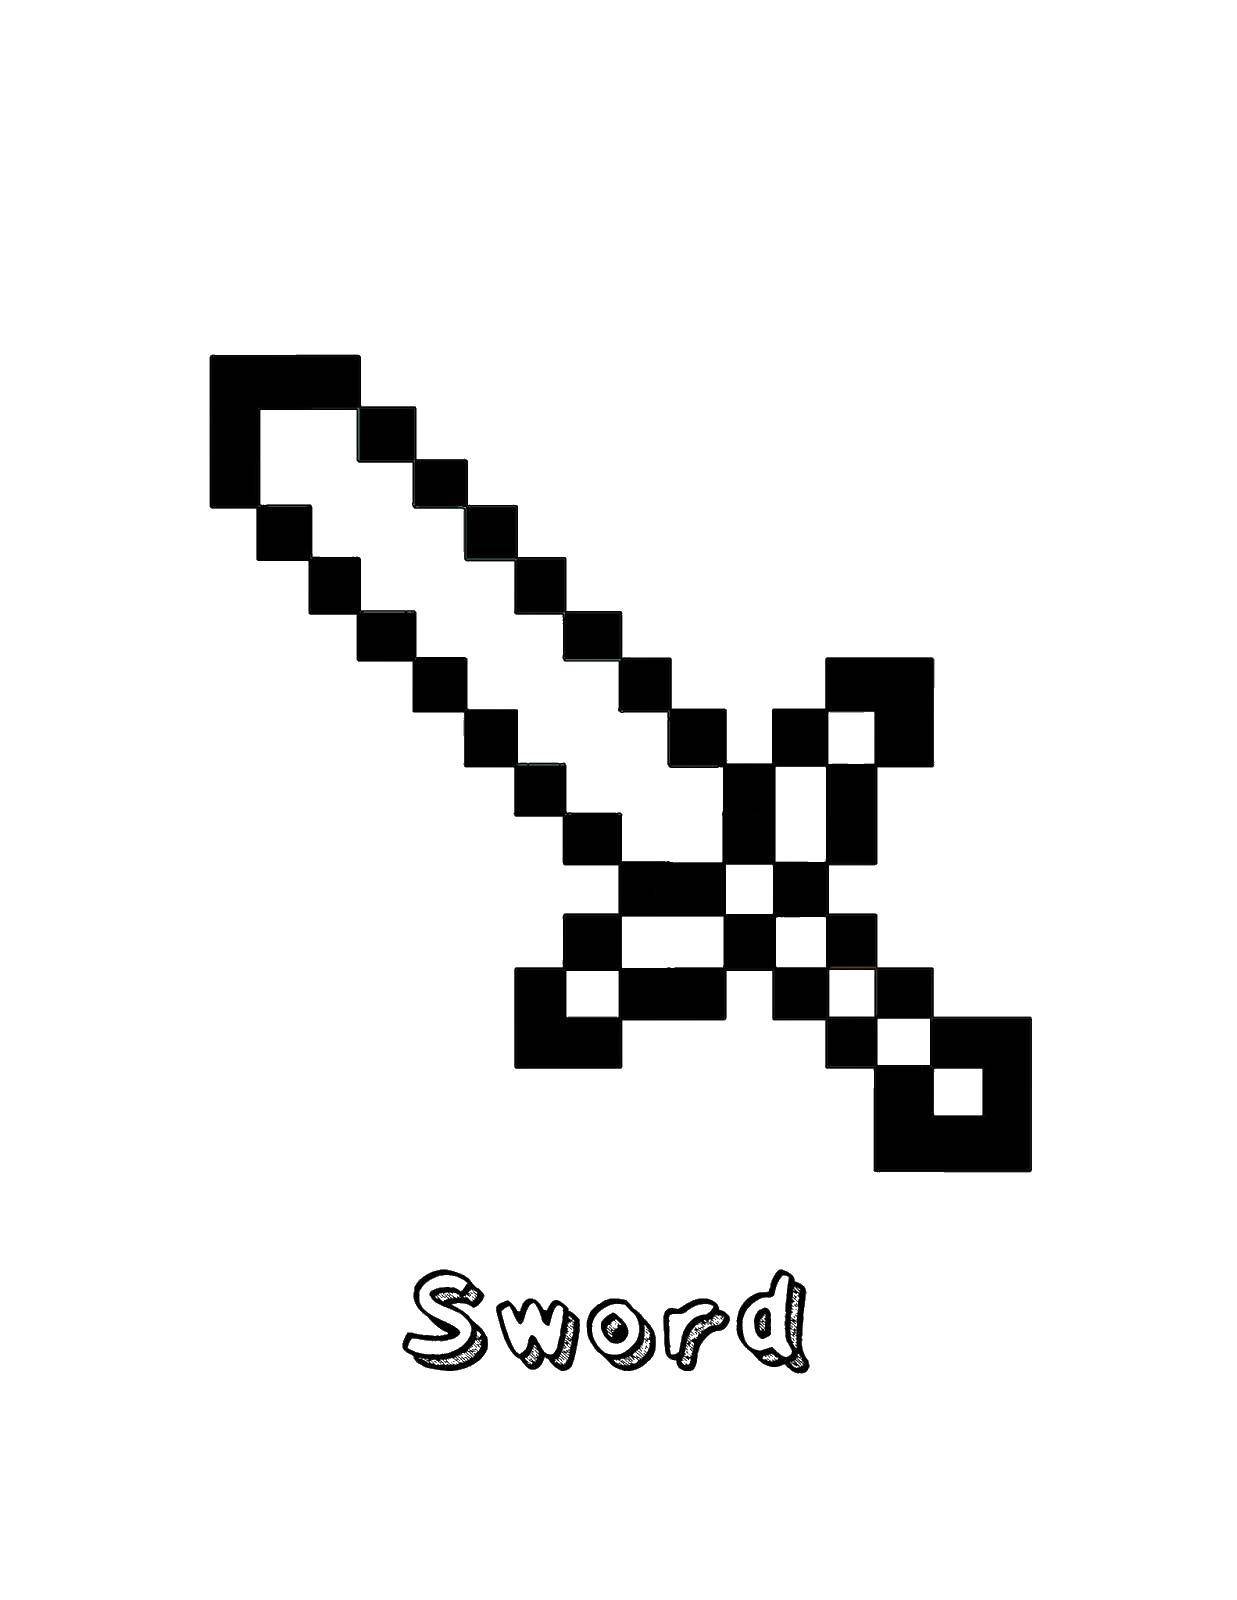 Coloring Sword minecraft. Category minecraft. Tags:  minecraft, sword.